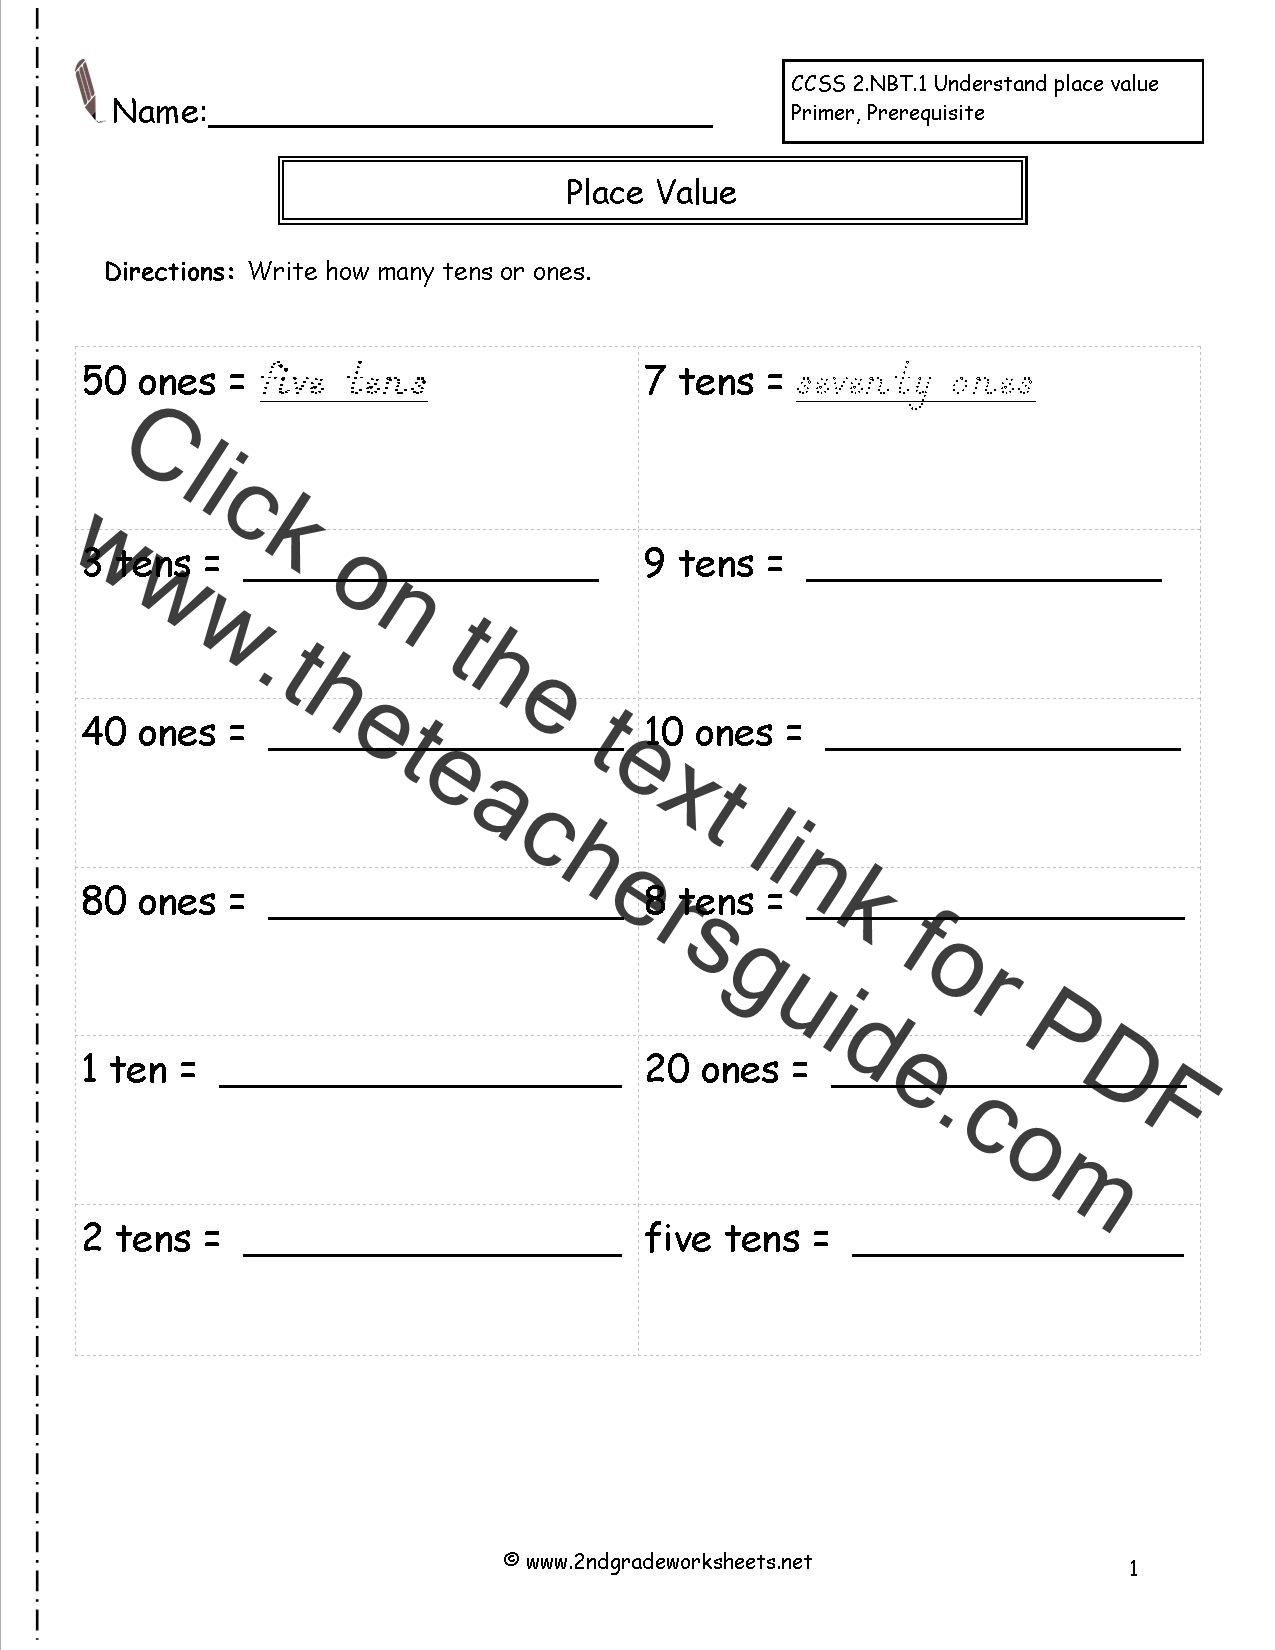 tens-and-ones-worksheets-grade-2-an-a2-board-game-to-practice-conversation-questions-for-the